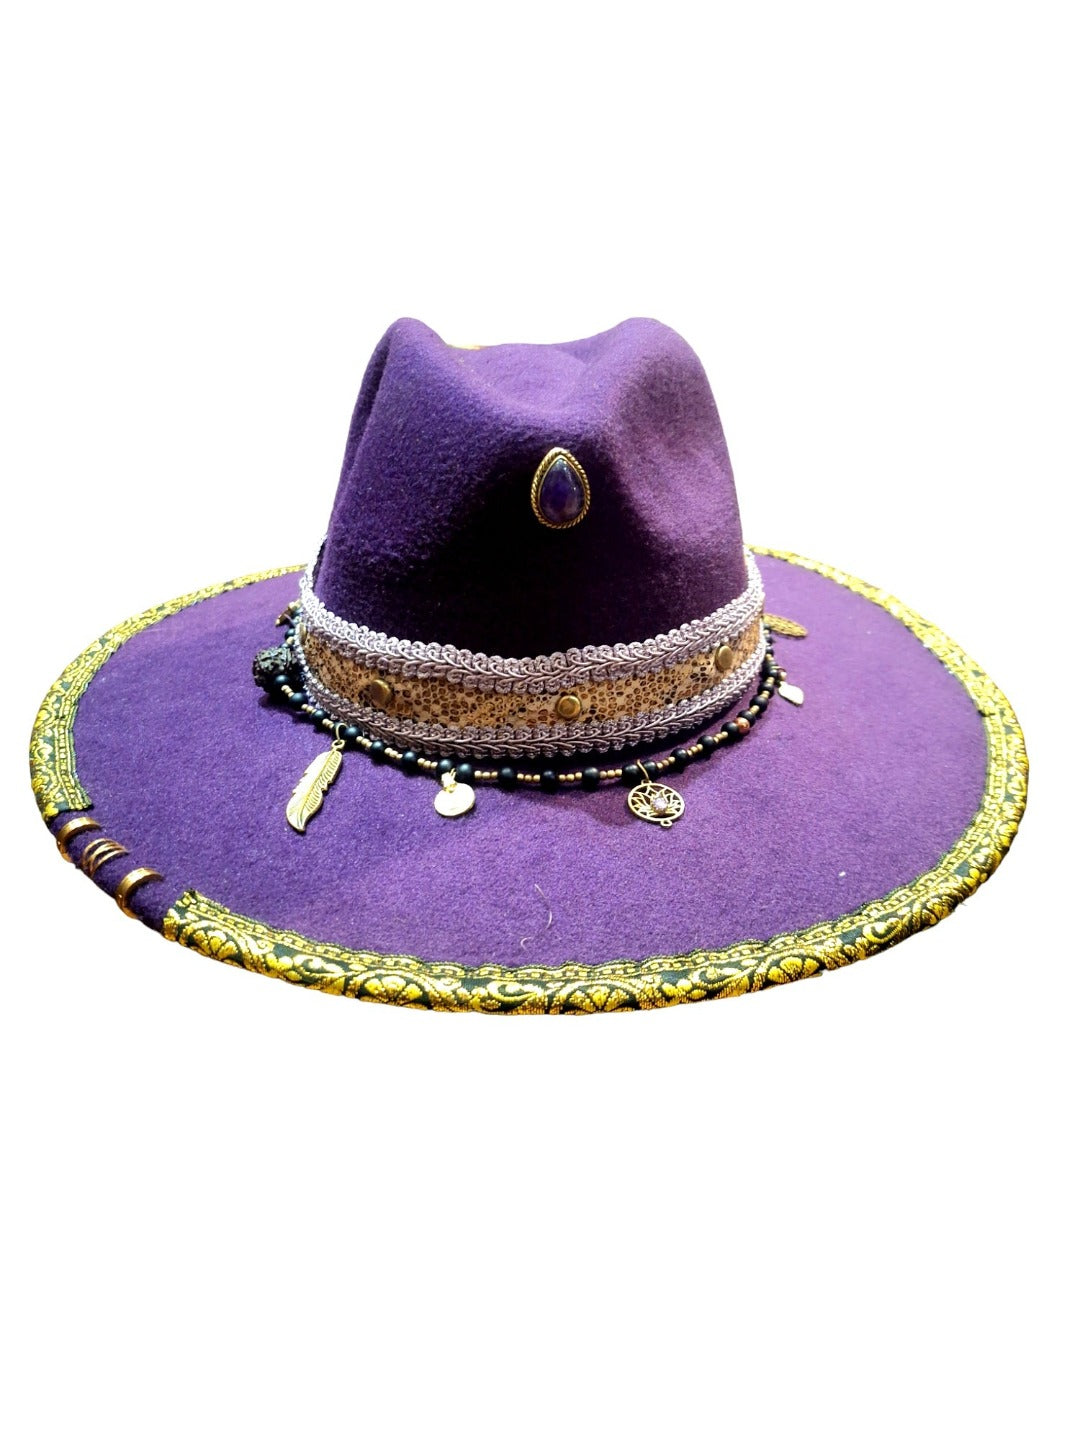 Wide-brimmed hat:"The Witch You Didn't Burn"